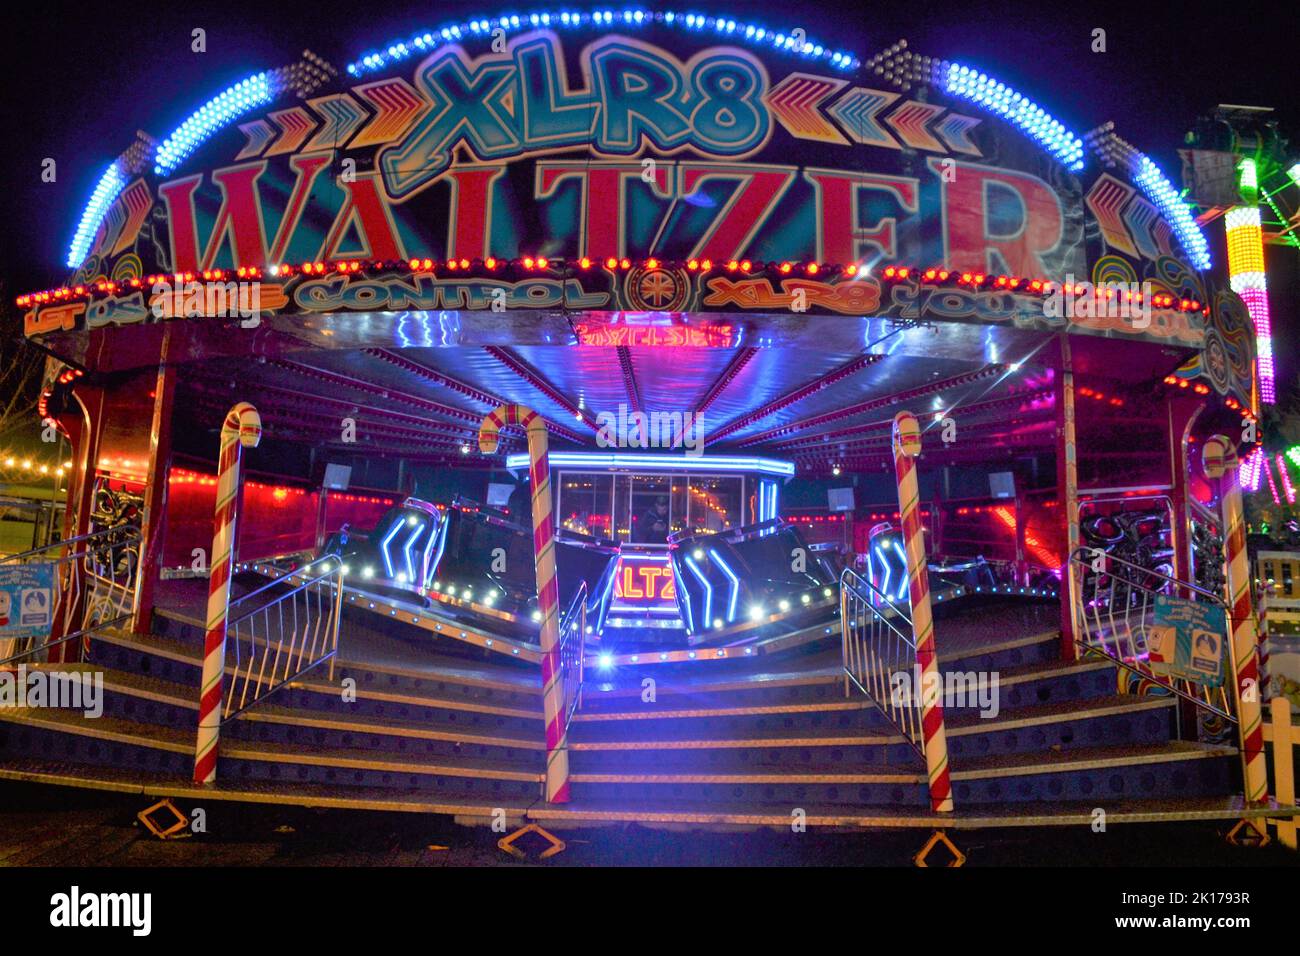 Waltzer Funfair Ride At Night With Bright Flashing Lights - Fast Fair Ride - Spinning Around In A Circle - Thrill Seekers Ride - Brighton - UK Stock Photo